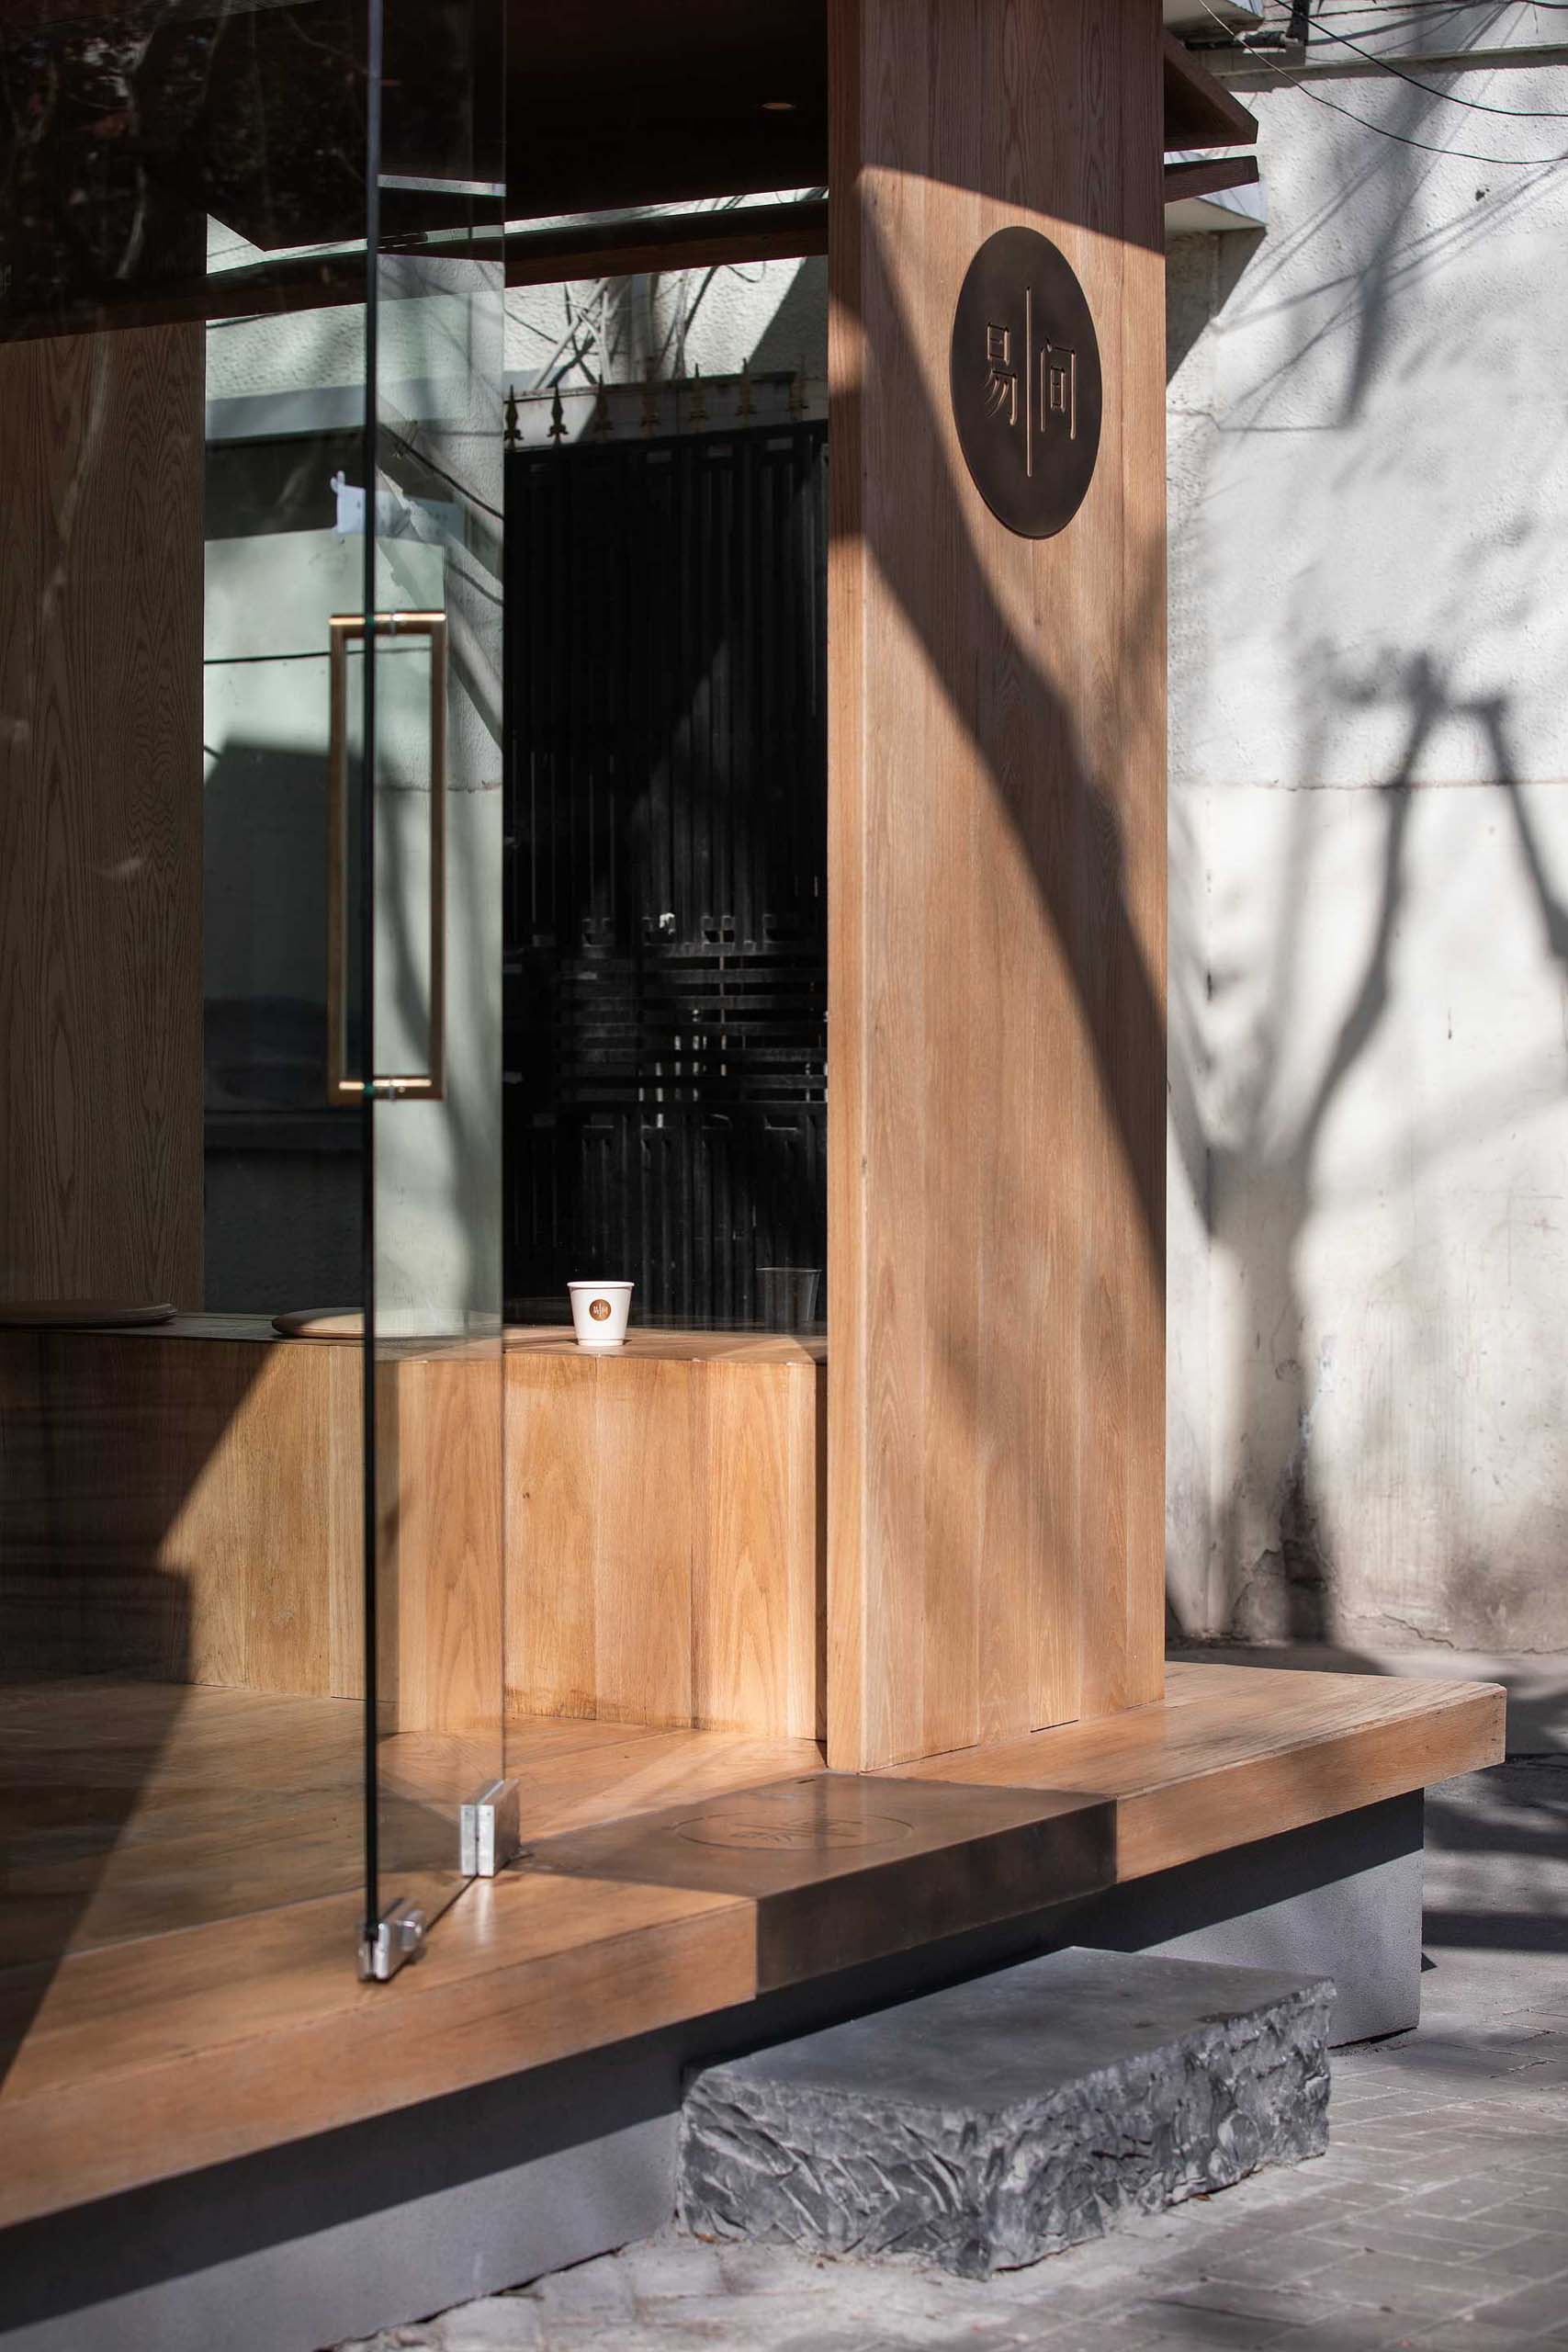 A modern coffee shop with a wood facade that includes bench seating.